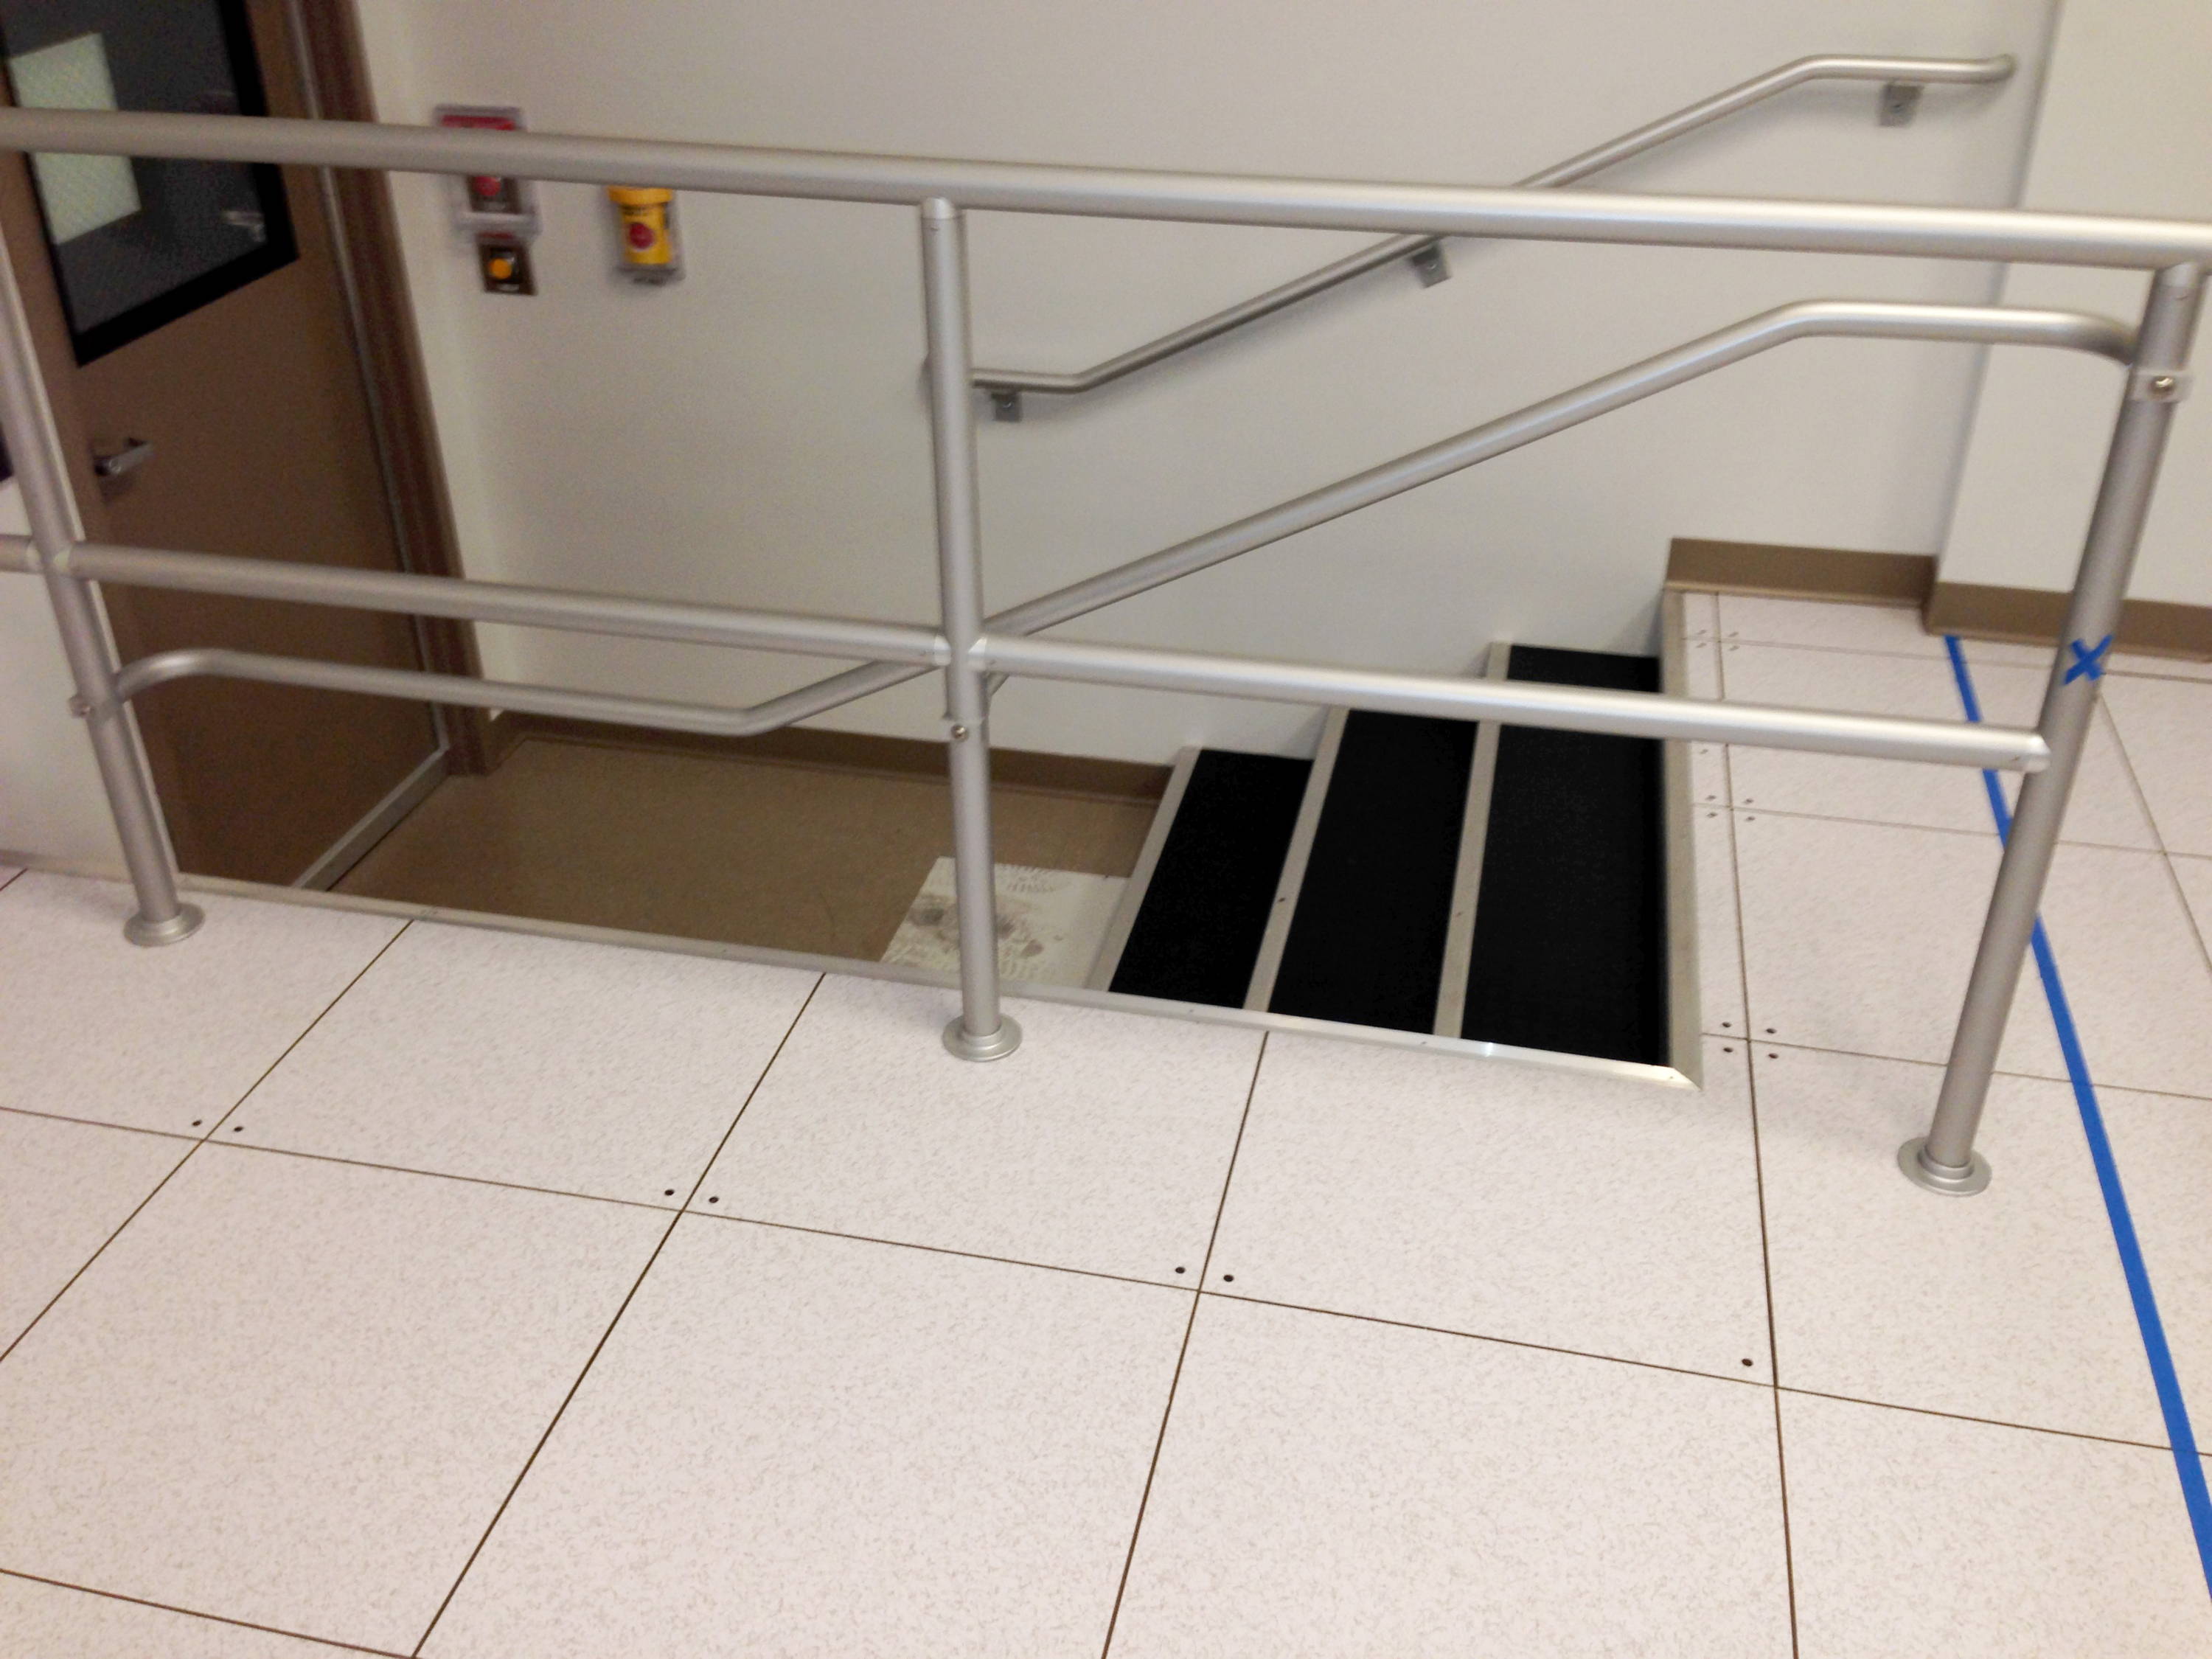 Handrails and other safety equipment is available from Tate.